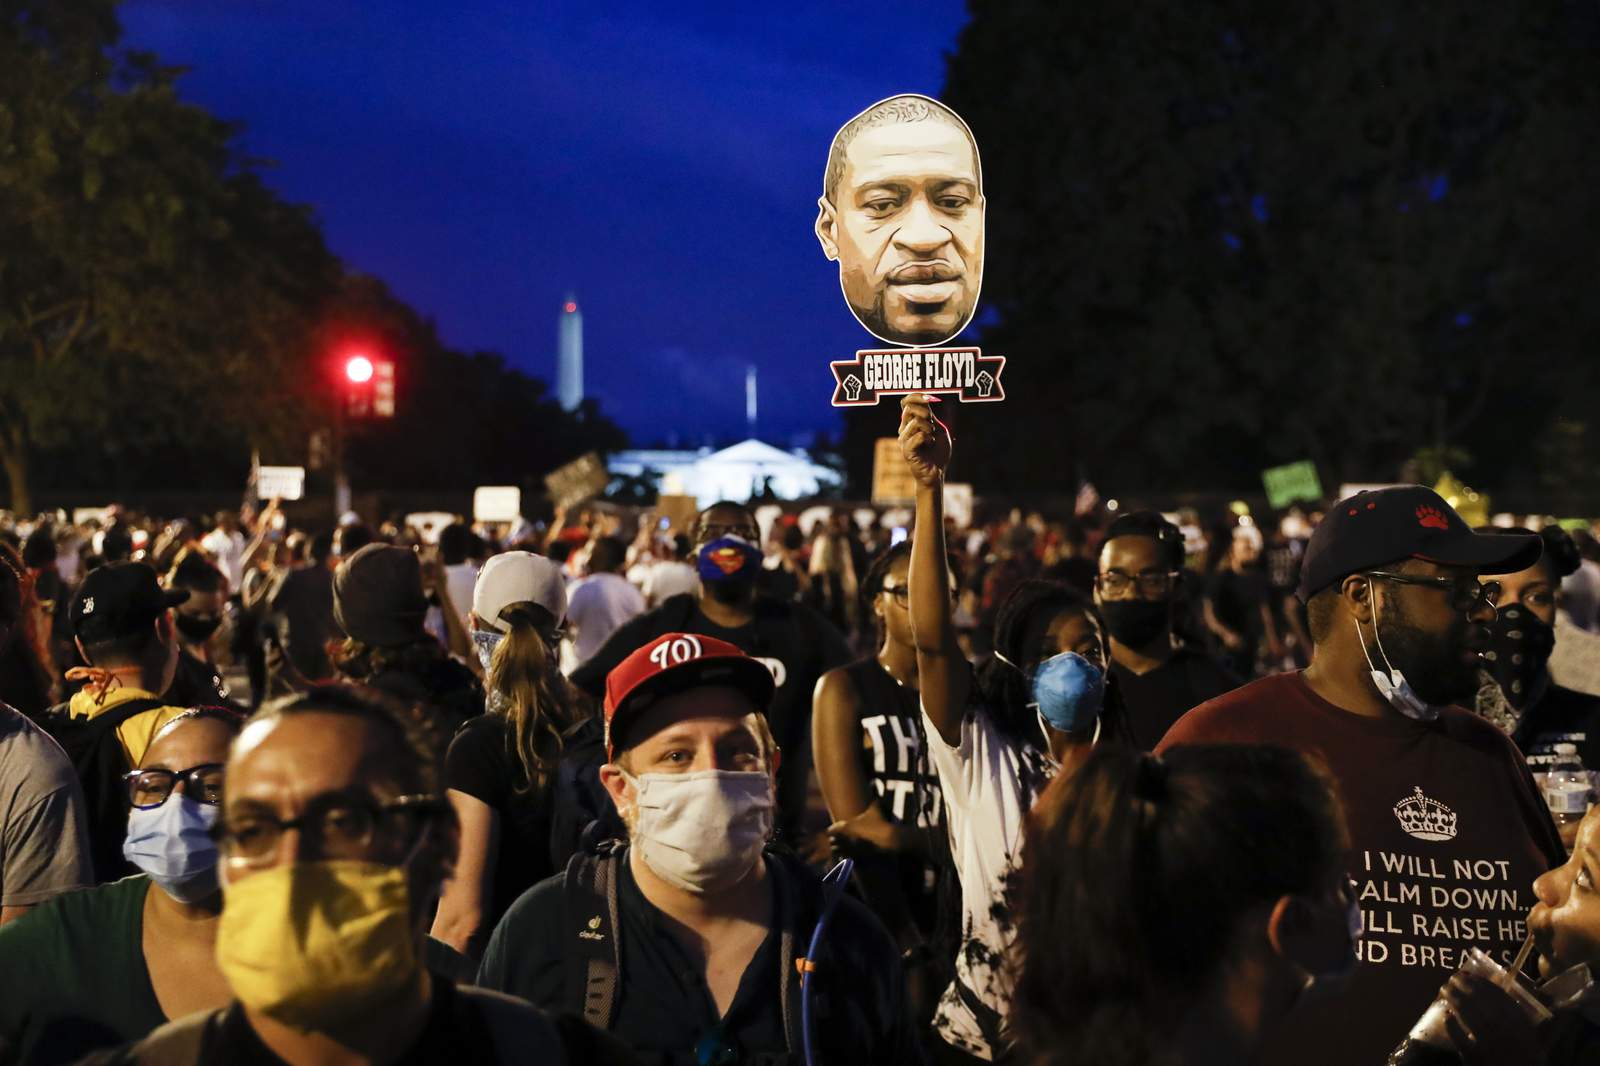 Largely peaceful protests against police brutality march on